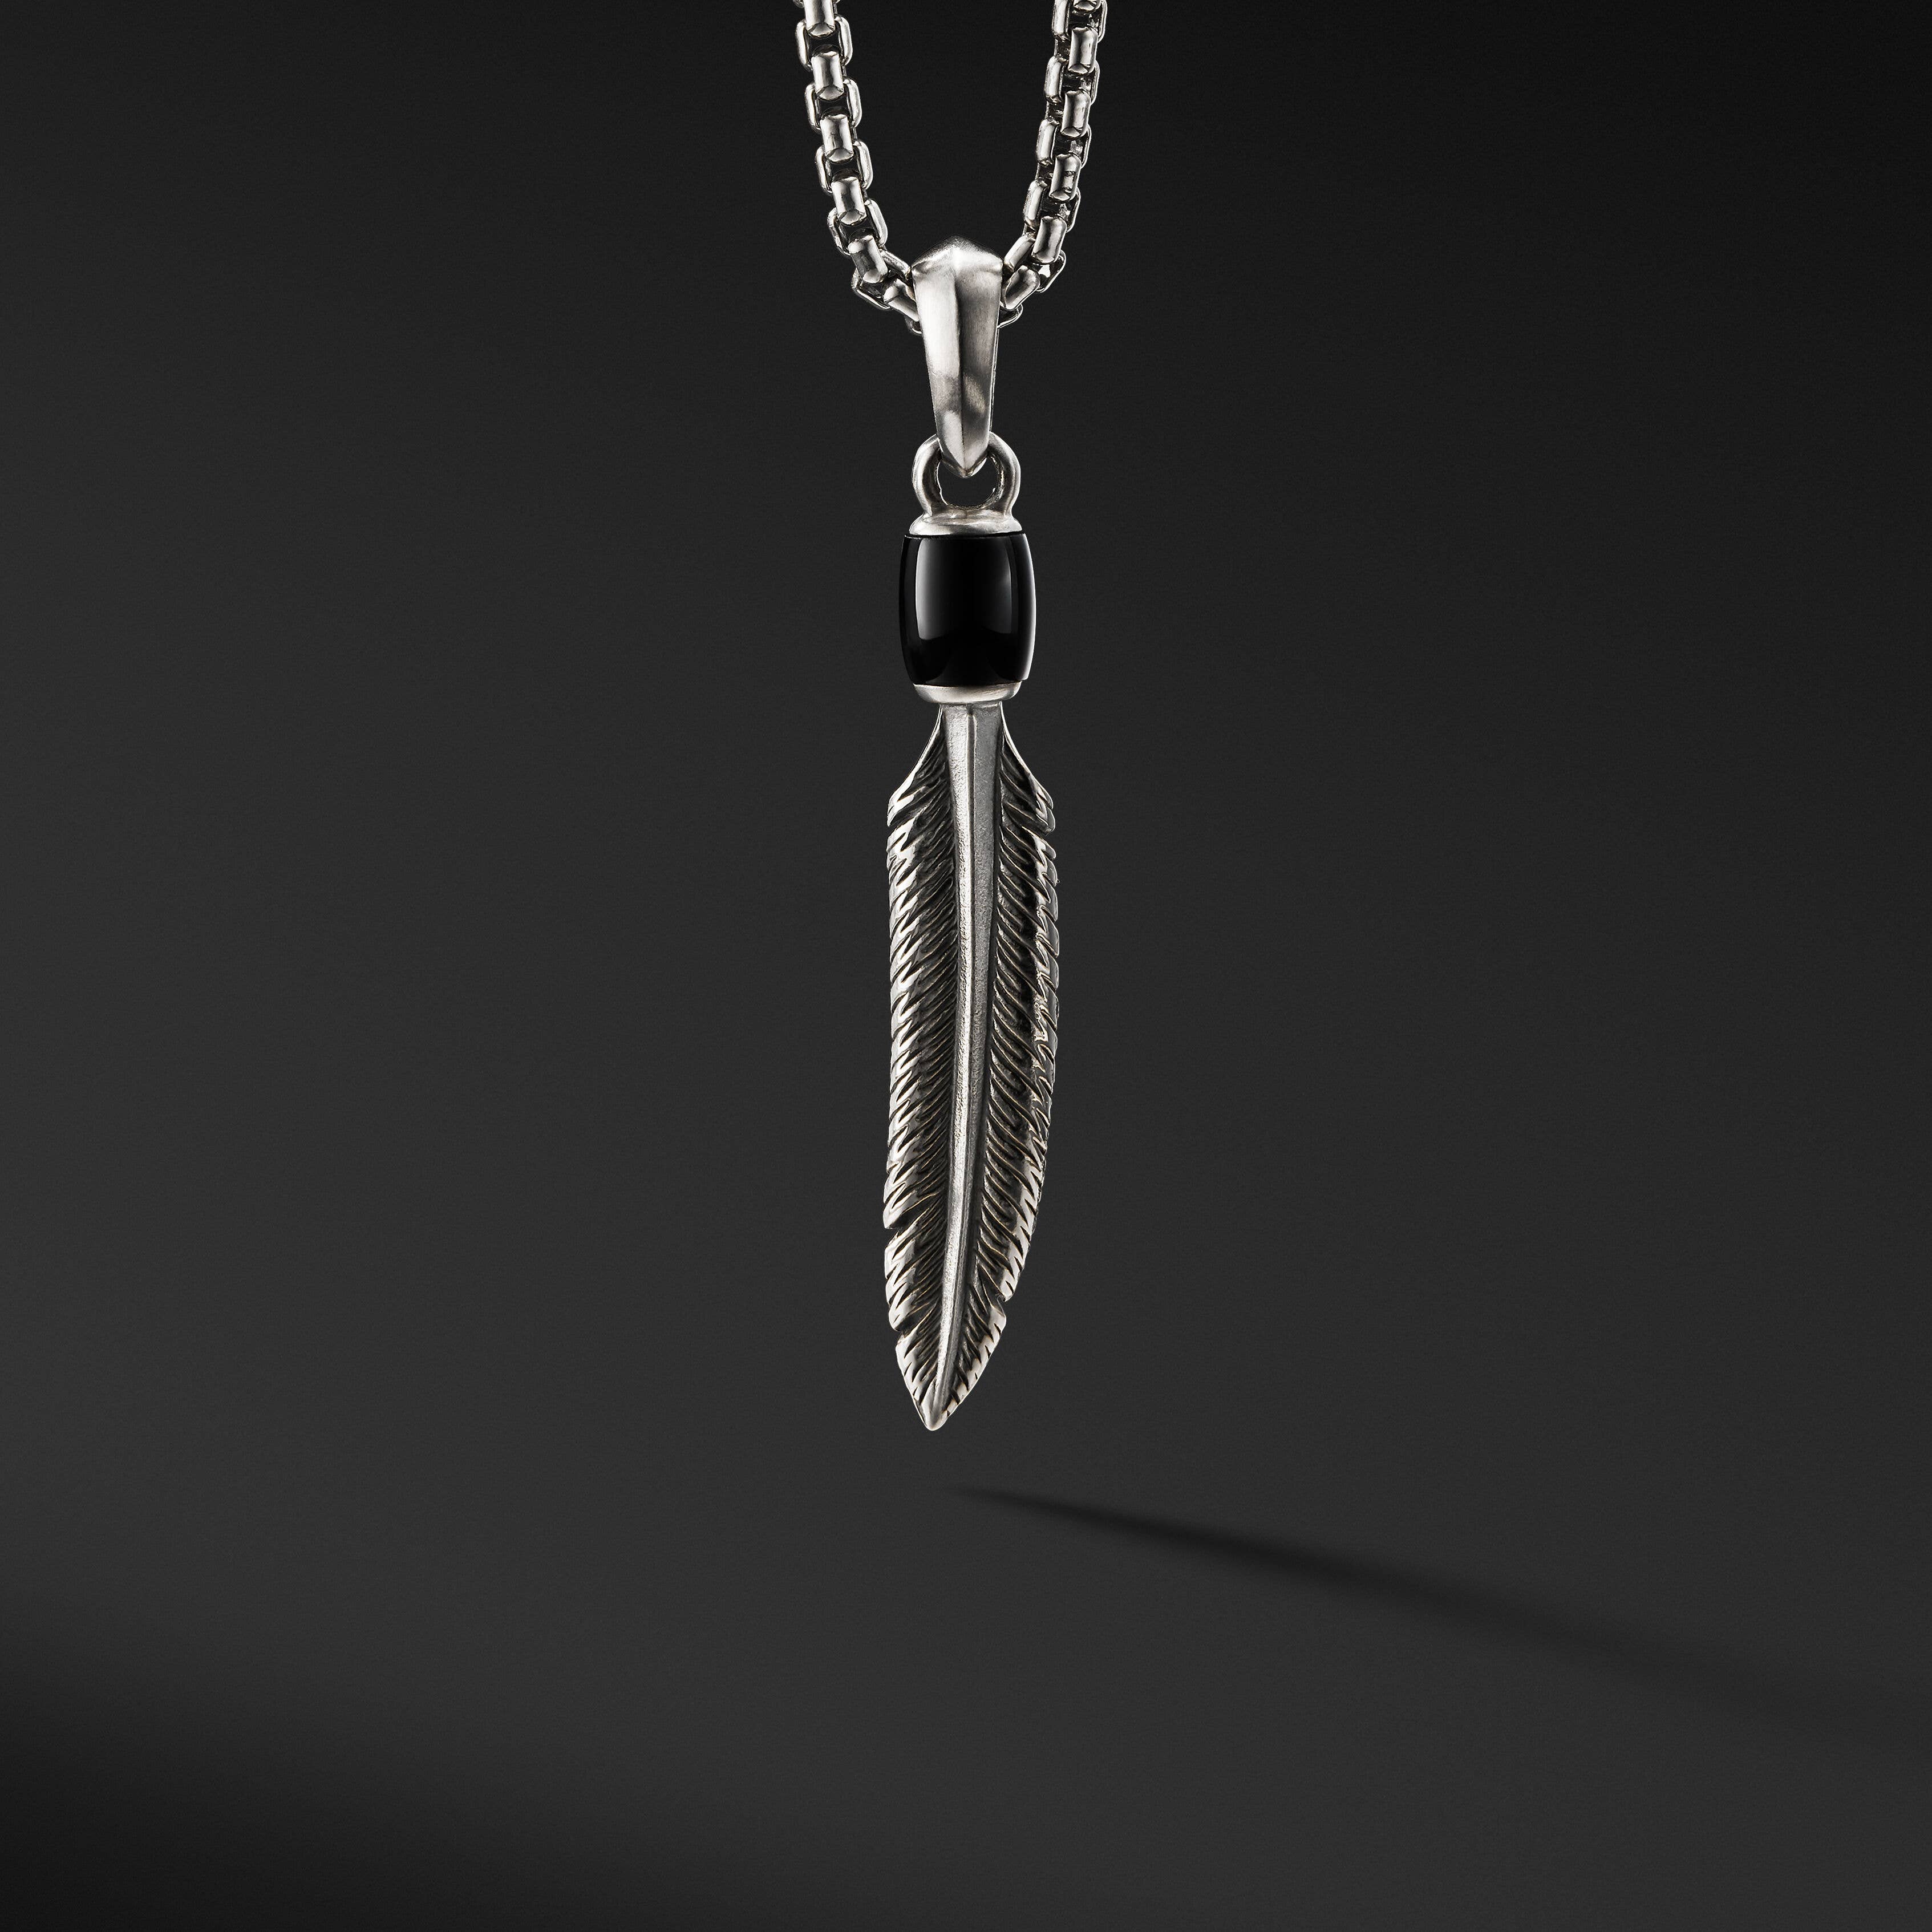 Southwest Feather Amulet in Sterling Silver with Black Onyx